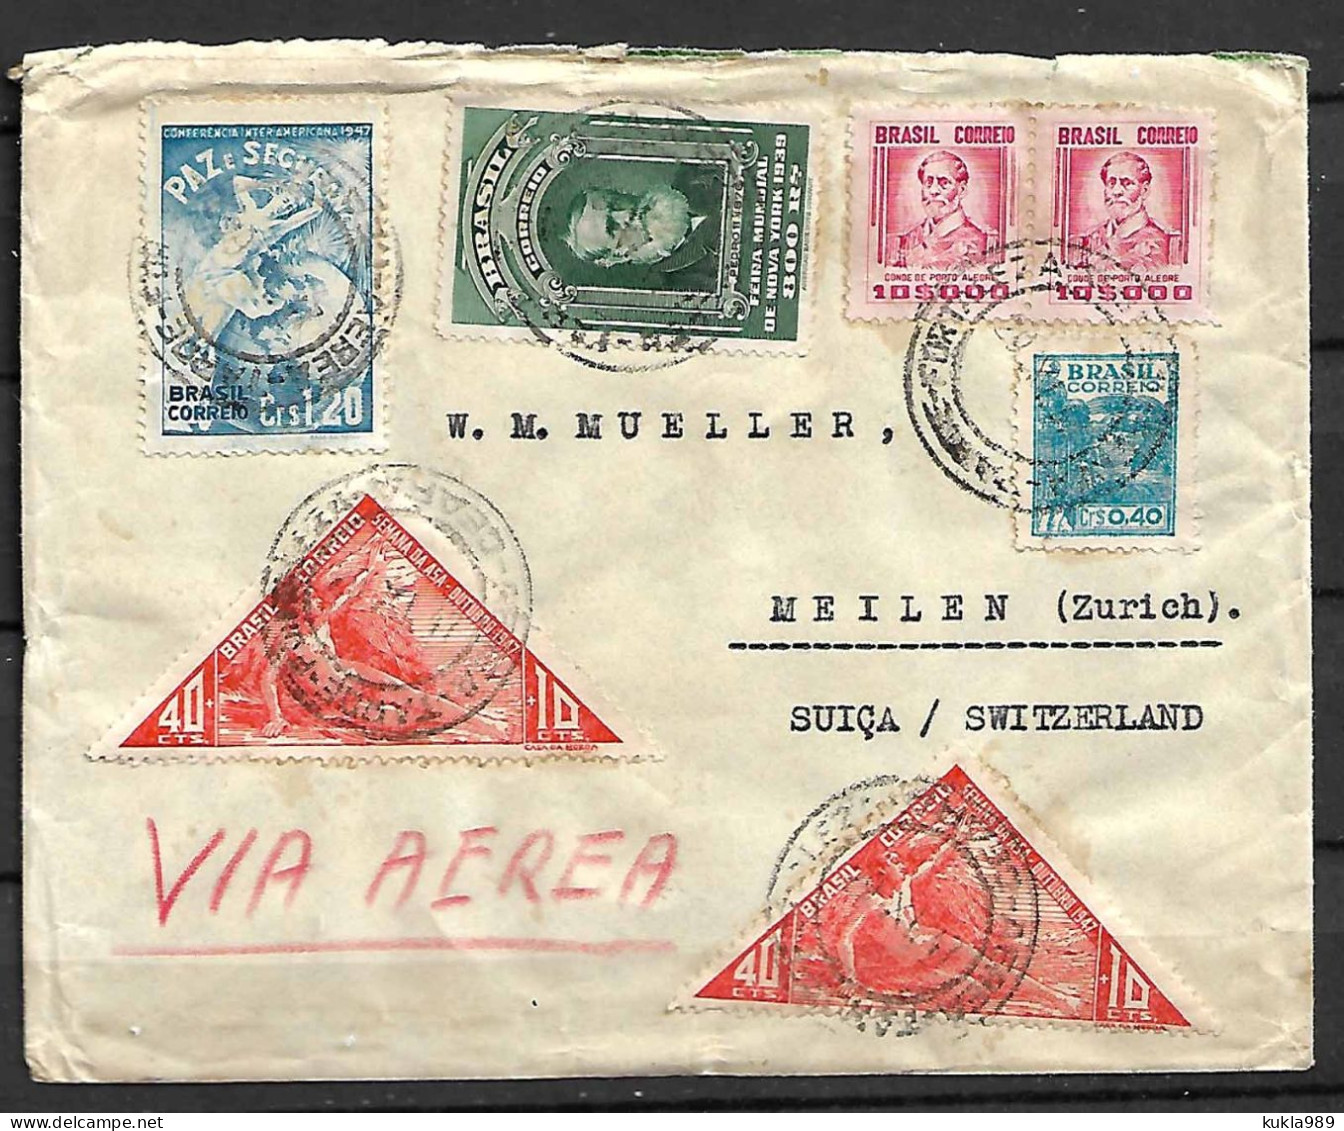 BRAZIL STAMPS. 1947 COVER TO SWITZERLAND - Covers & Documents